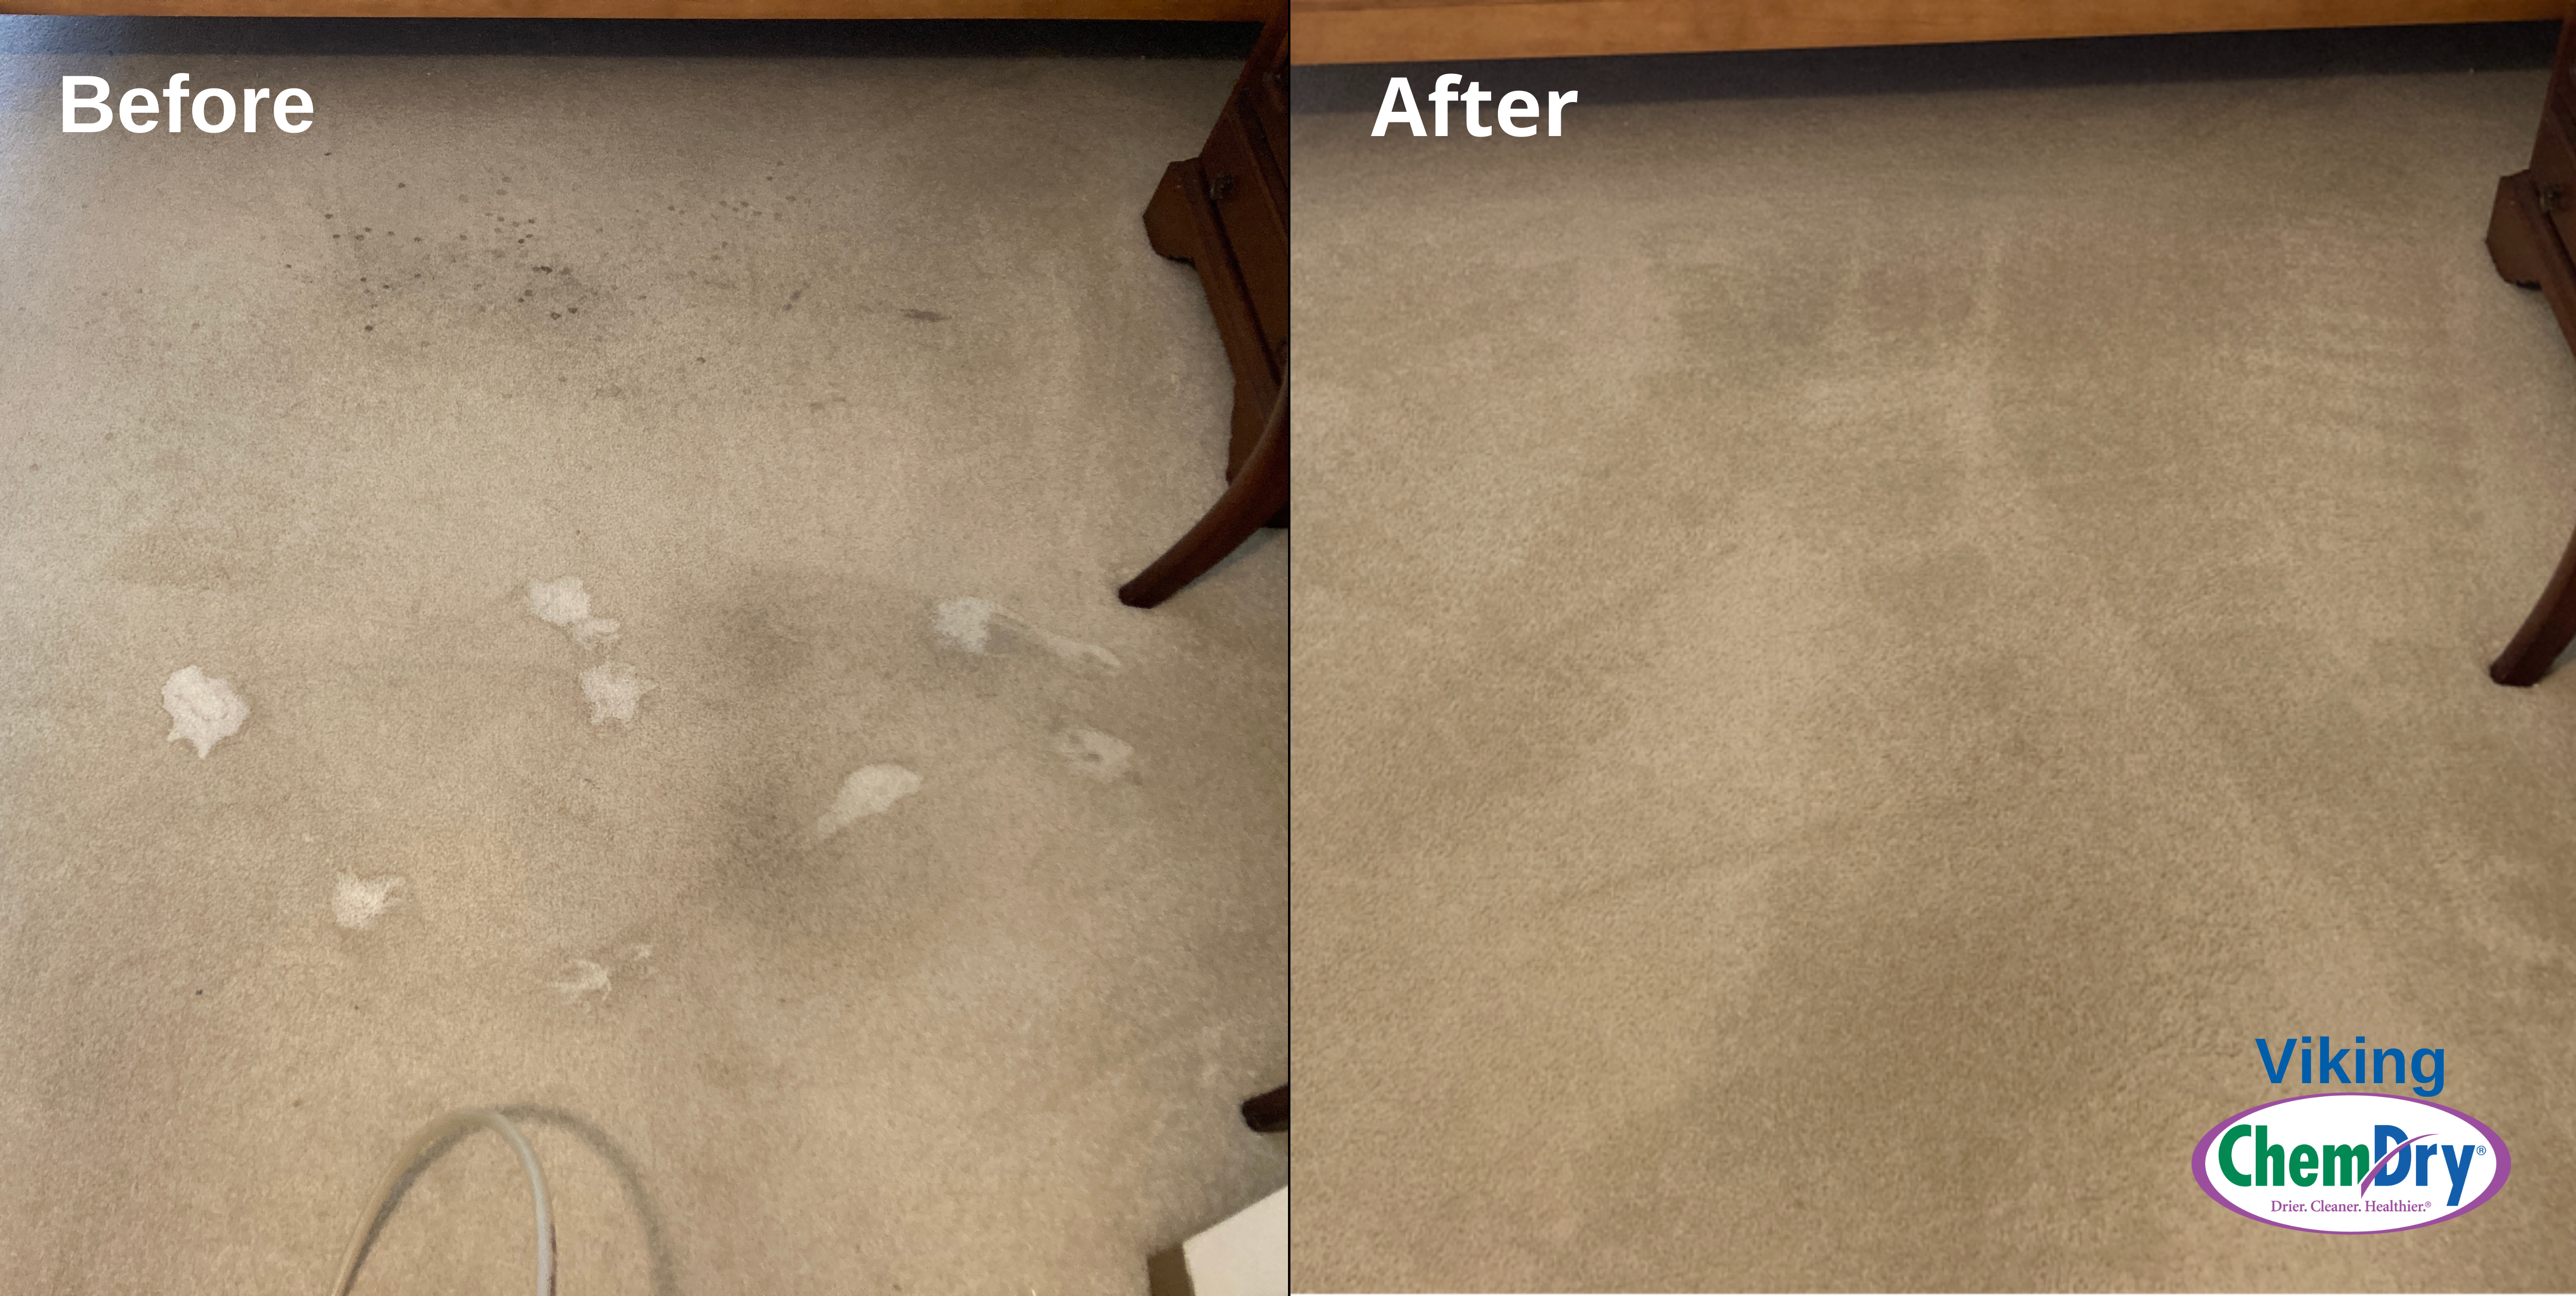 Viking Chem-Dry is your healthy home provider for carpet and upholstery cleaning in Plymouth, Minnesota